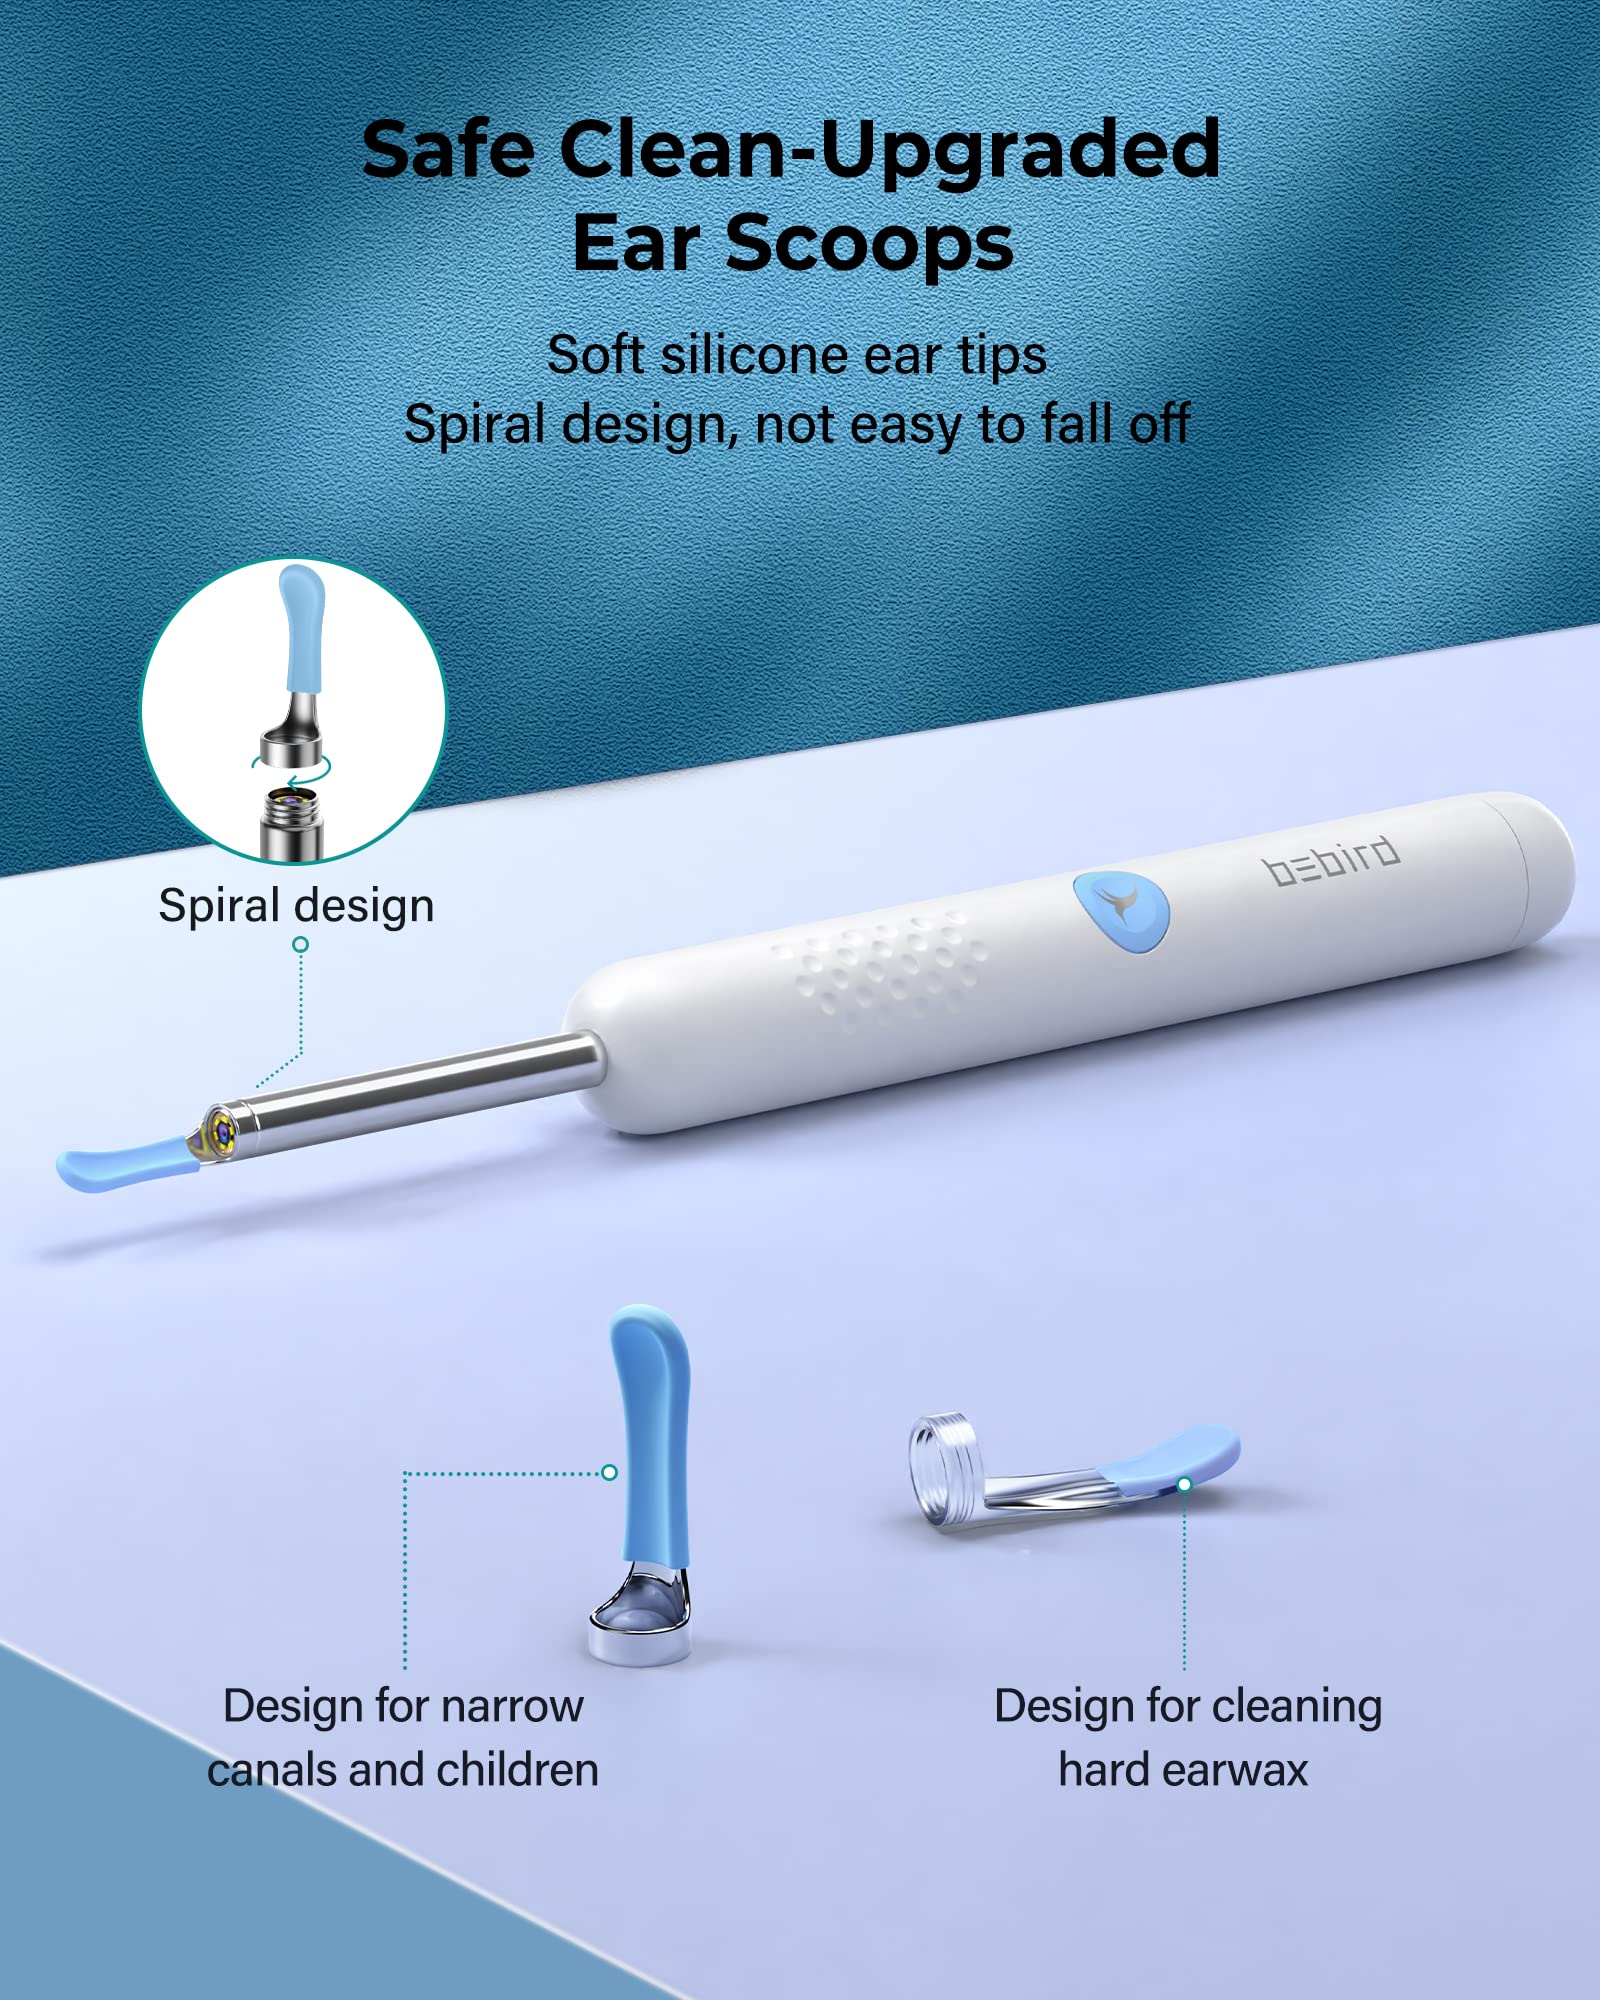 BEBIRD R1 Ear Wax Removal Tool, Ear Cleaner with Ear Camera, 1080P Ear Scope, Ear Wax Removal Kit with 2 Silicone Ear Scoops, Ear Pick with 6 LED Light for Earwax Removal, White